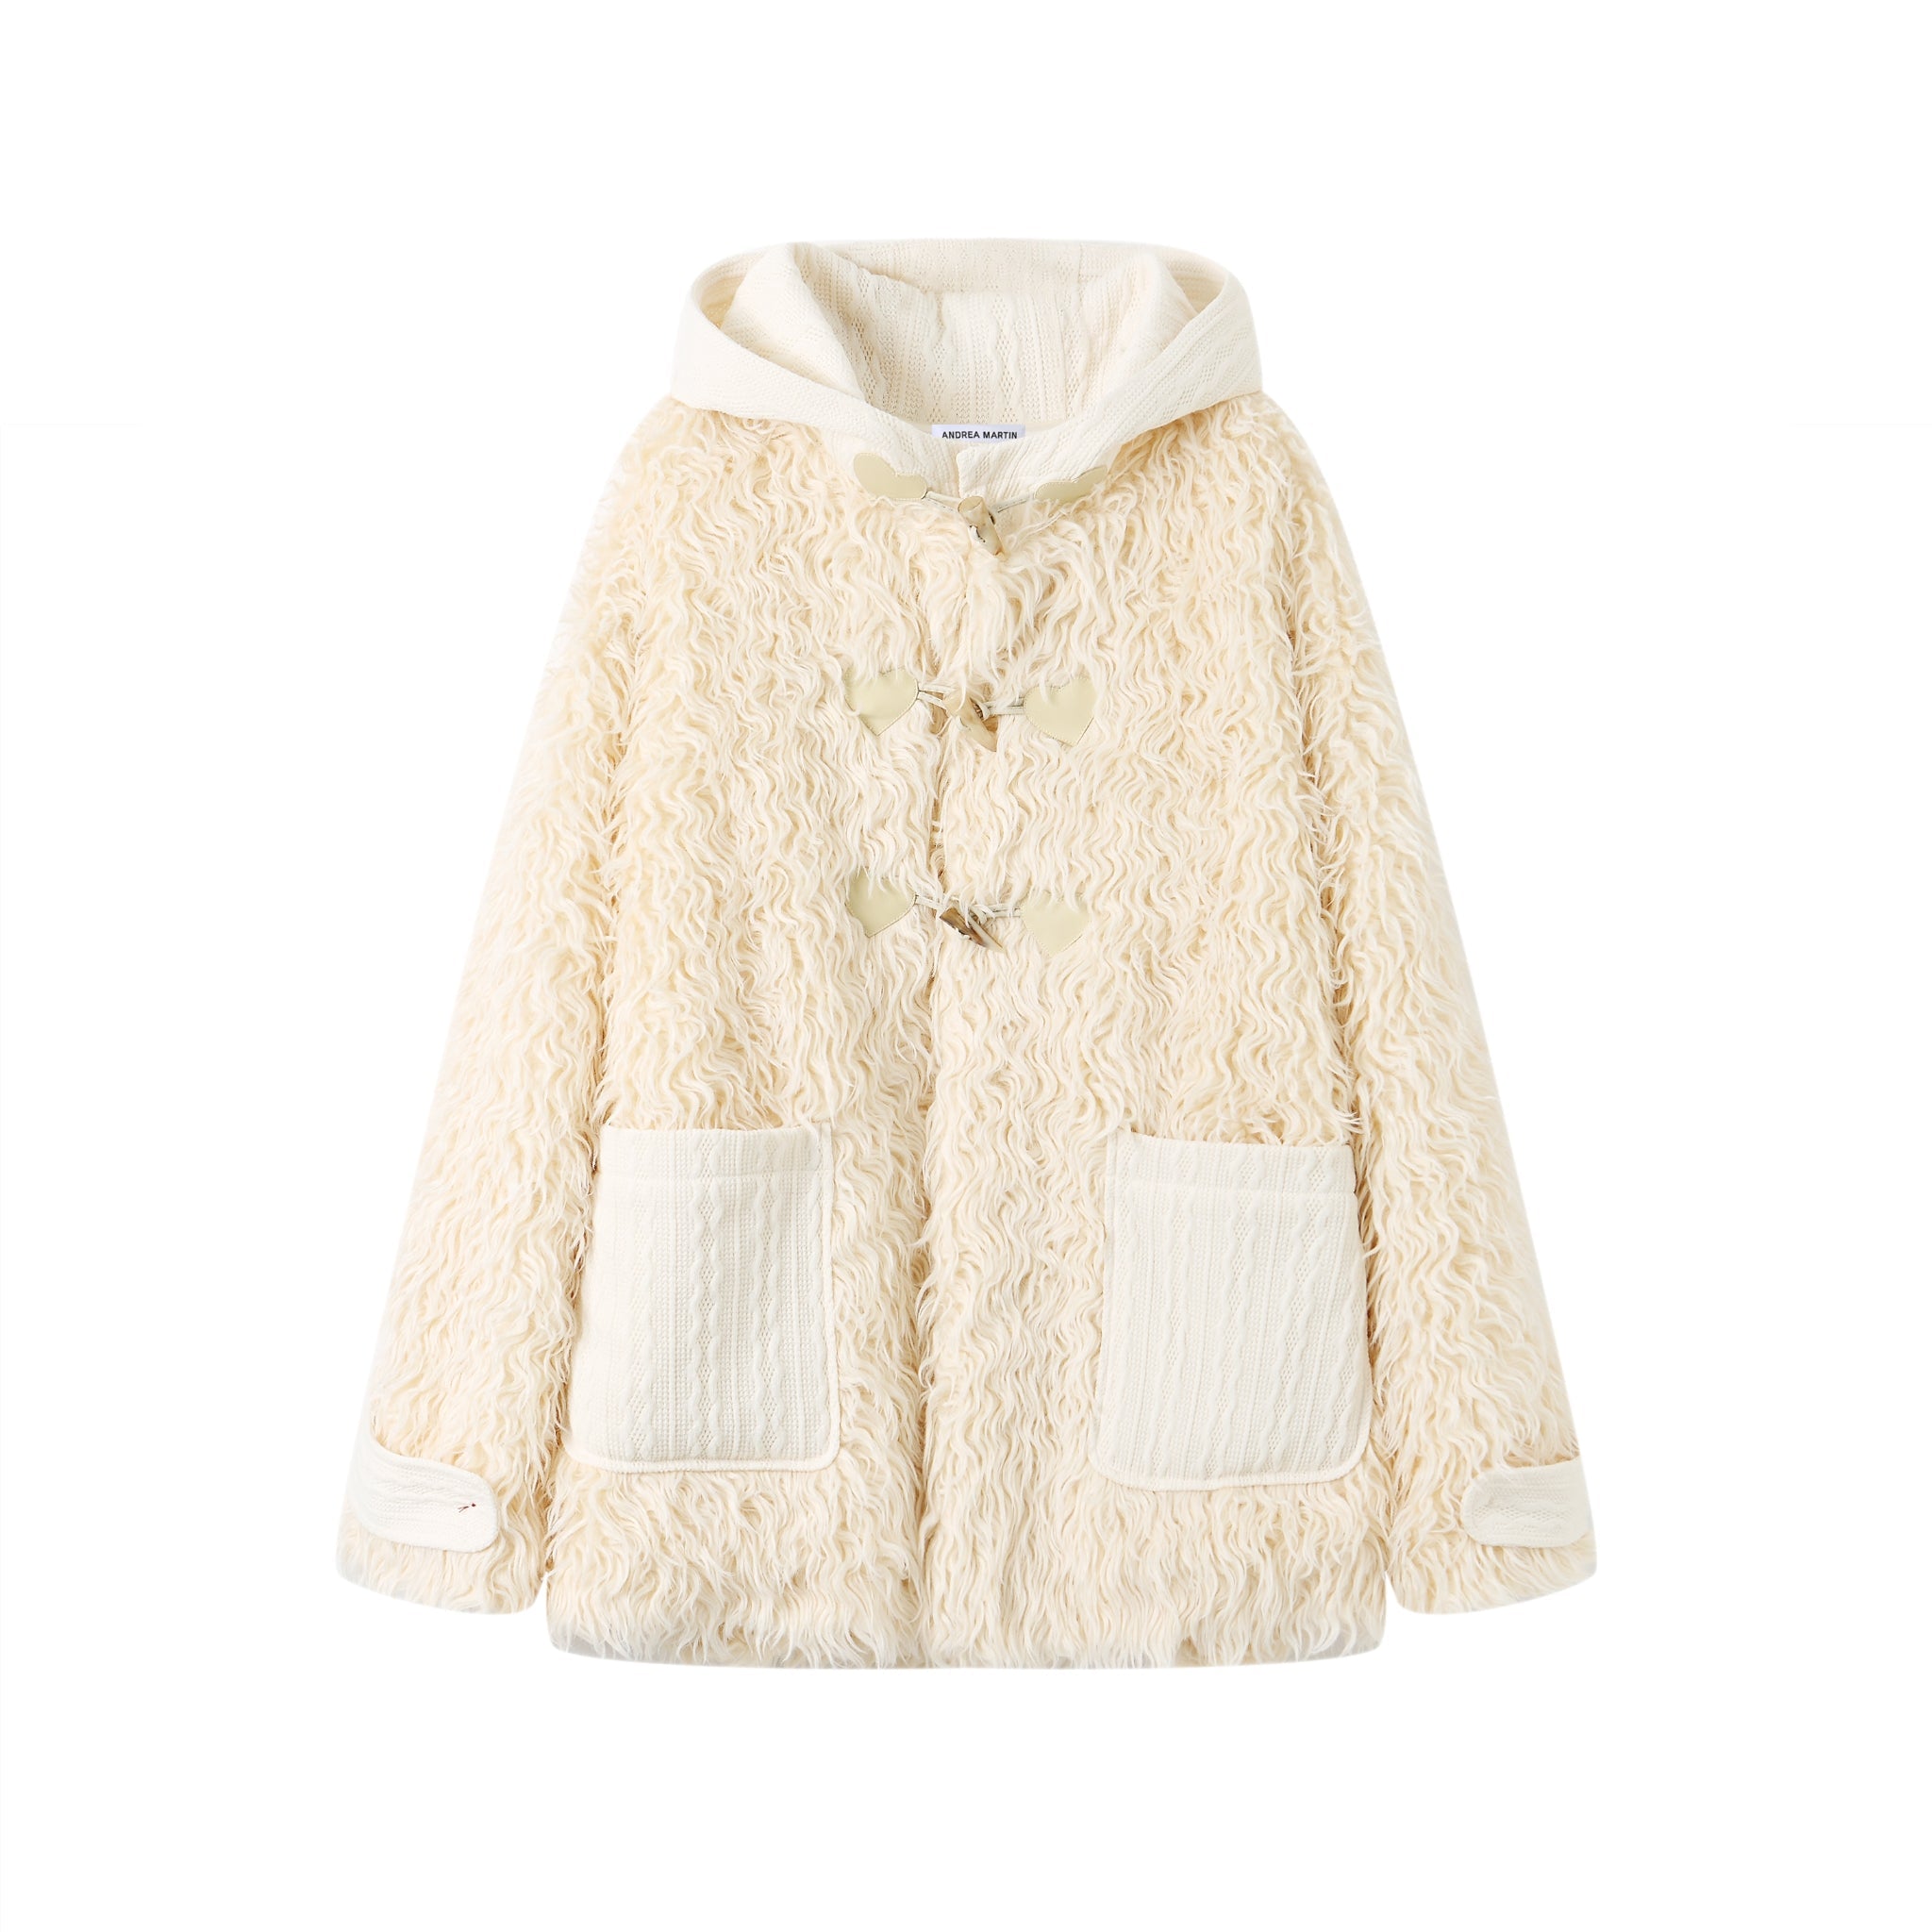 ANDREA MARTIN Beige Patchwork Woolly Coat | MADA IN CHINA